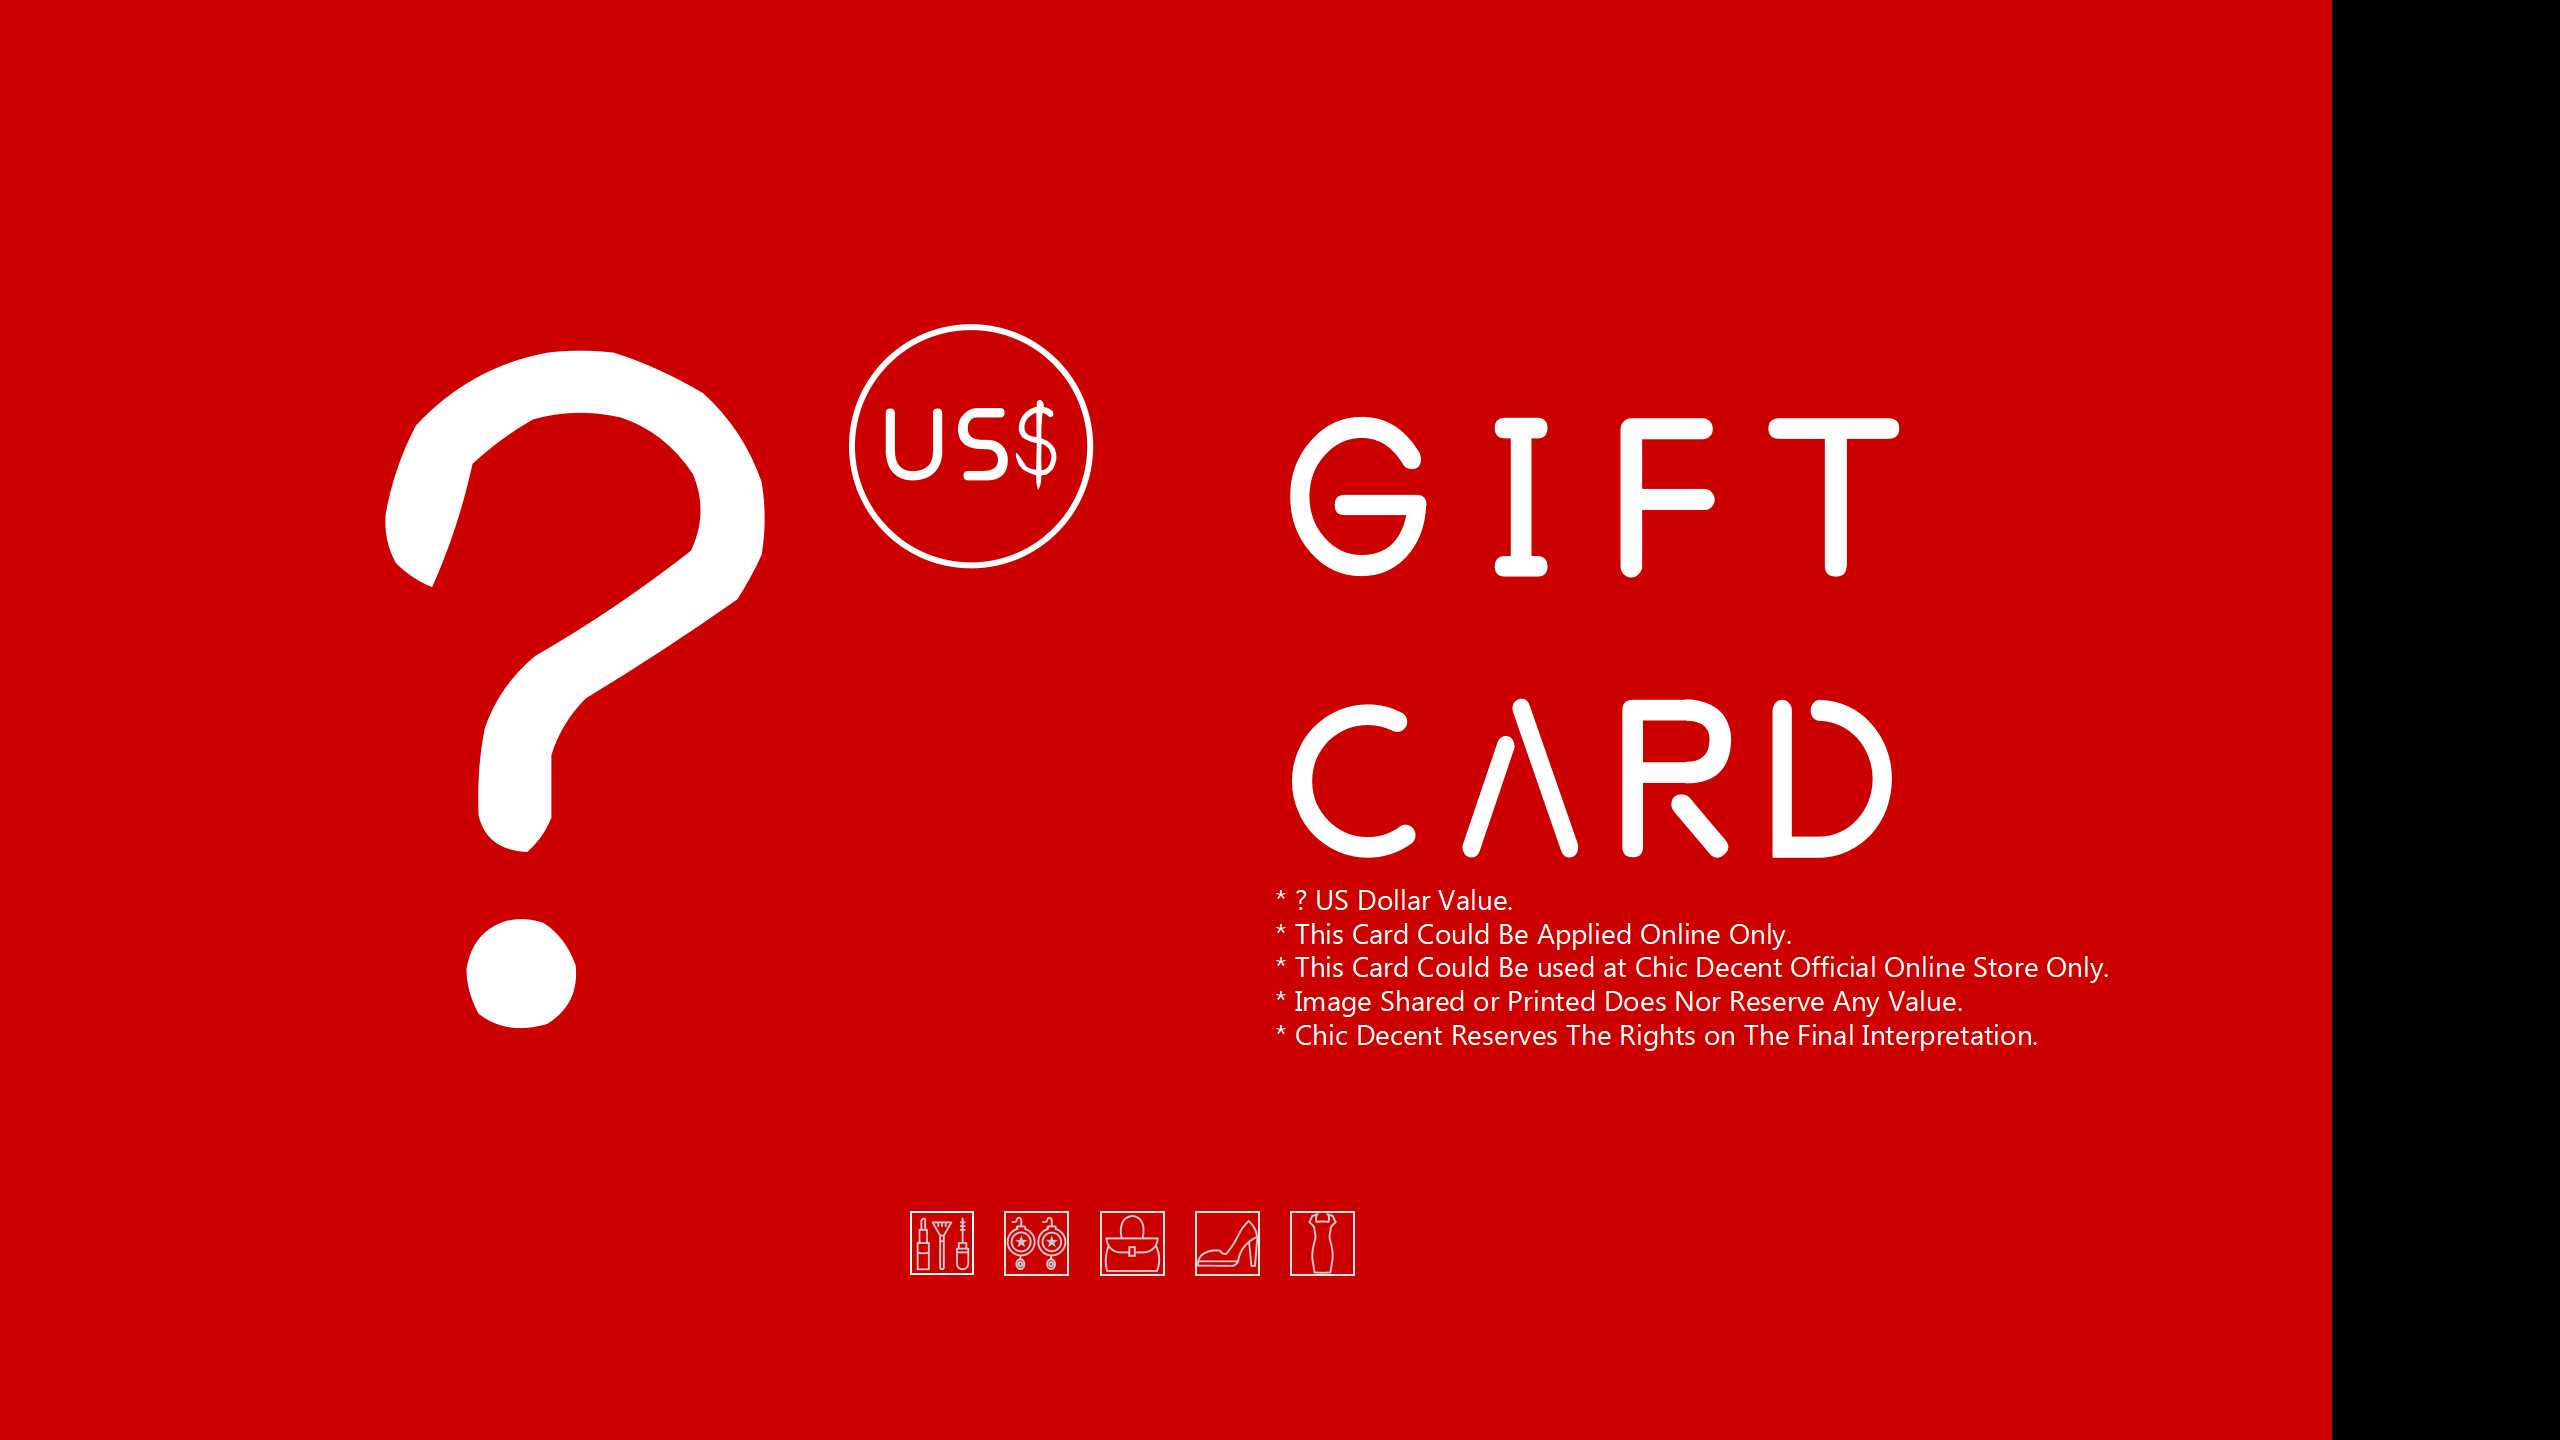 Gift Card Terms and FAQ - Chic Decent